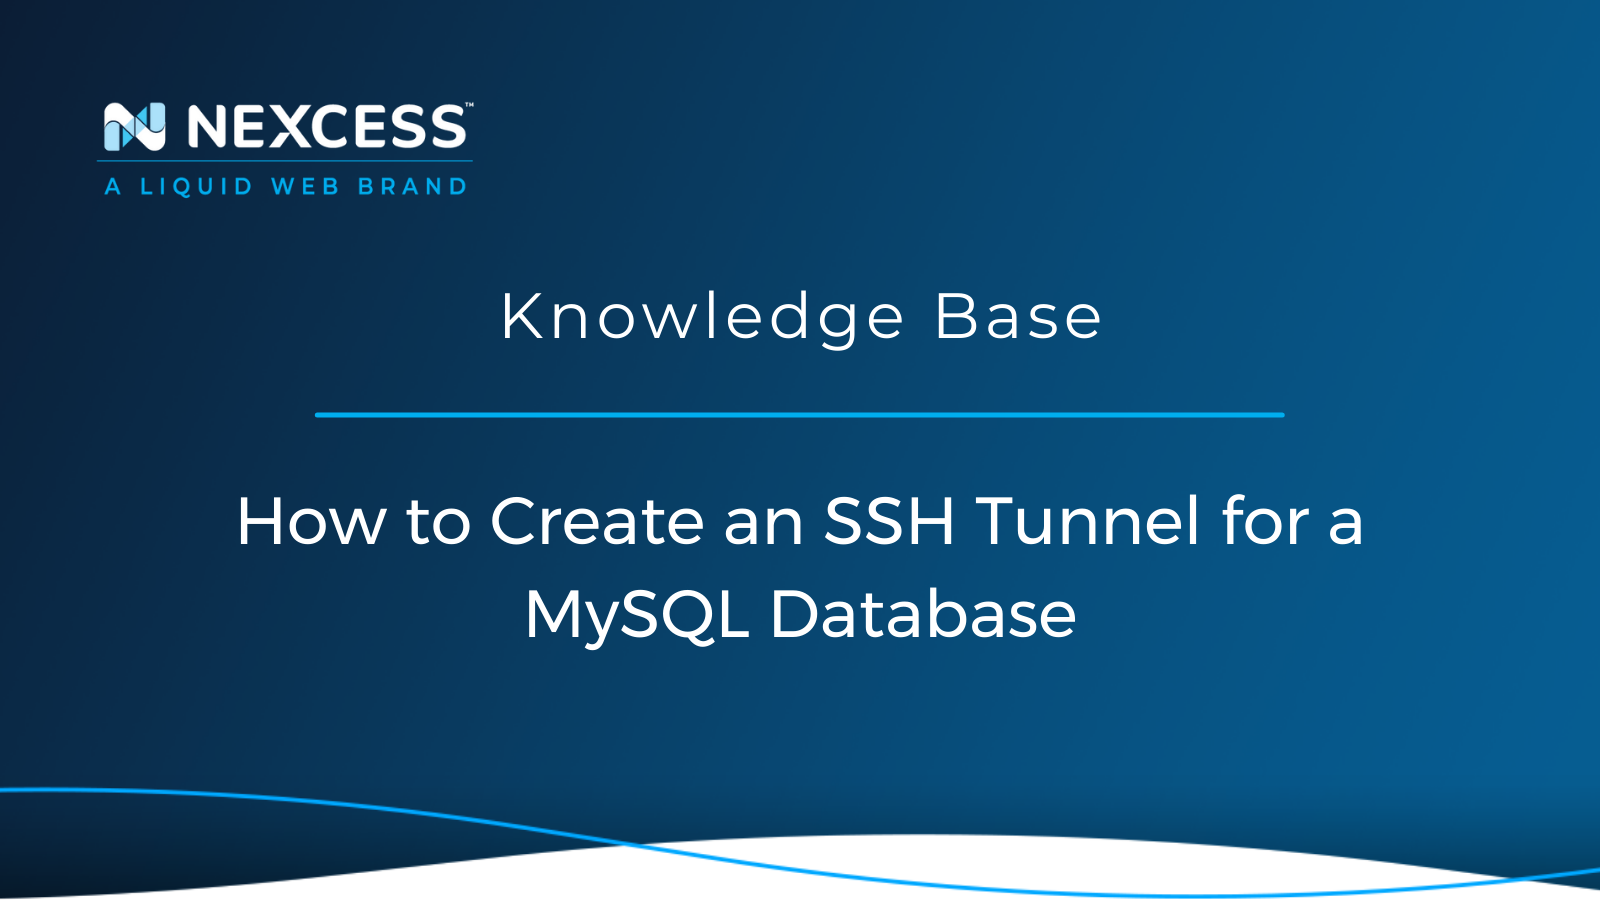 How to Create an SSH Tunnel for a MySQL Database